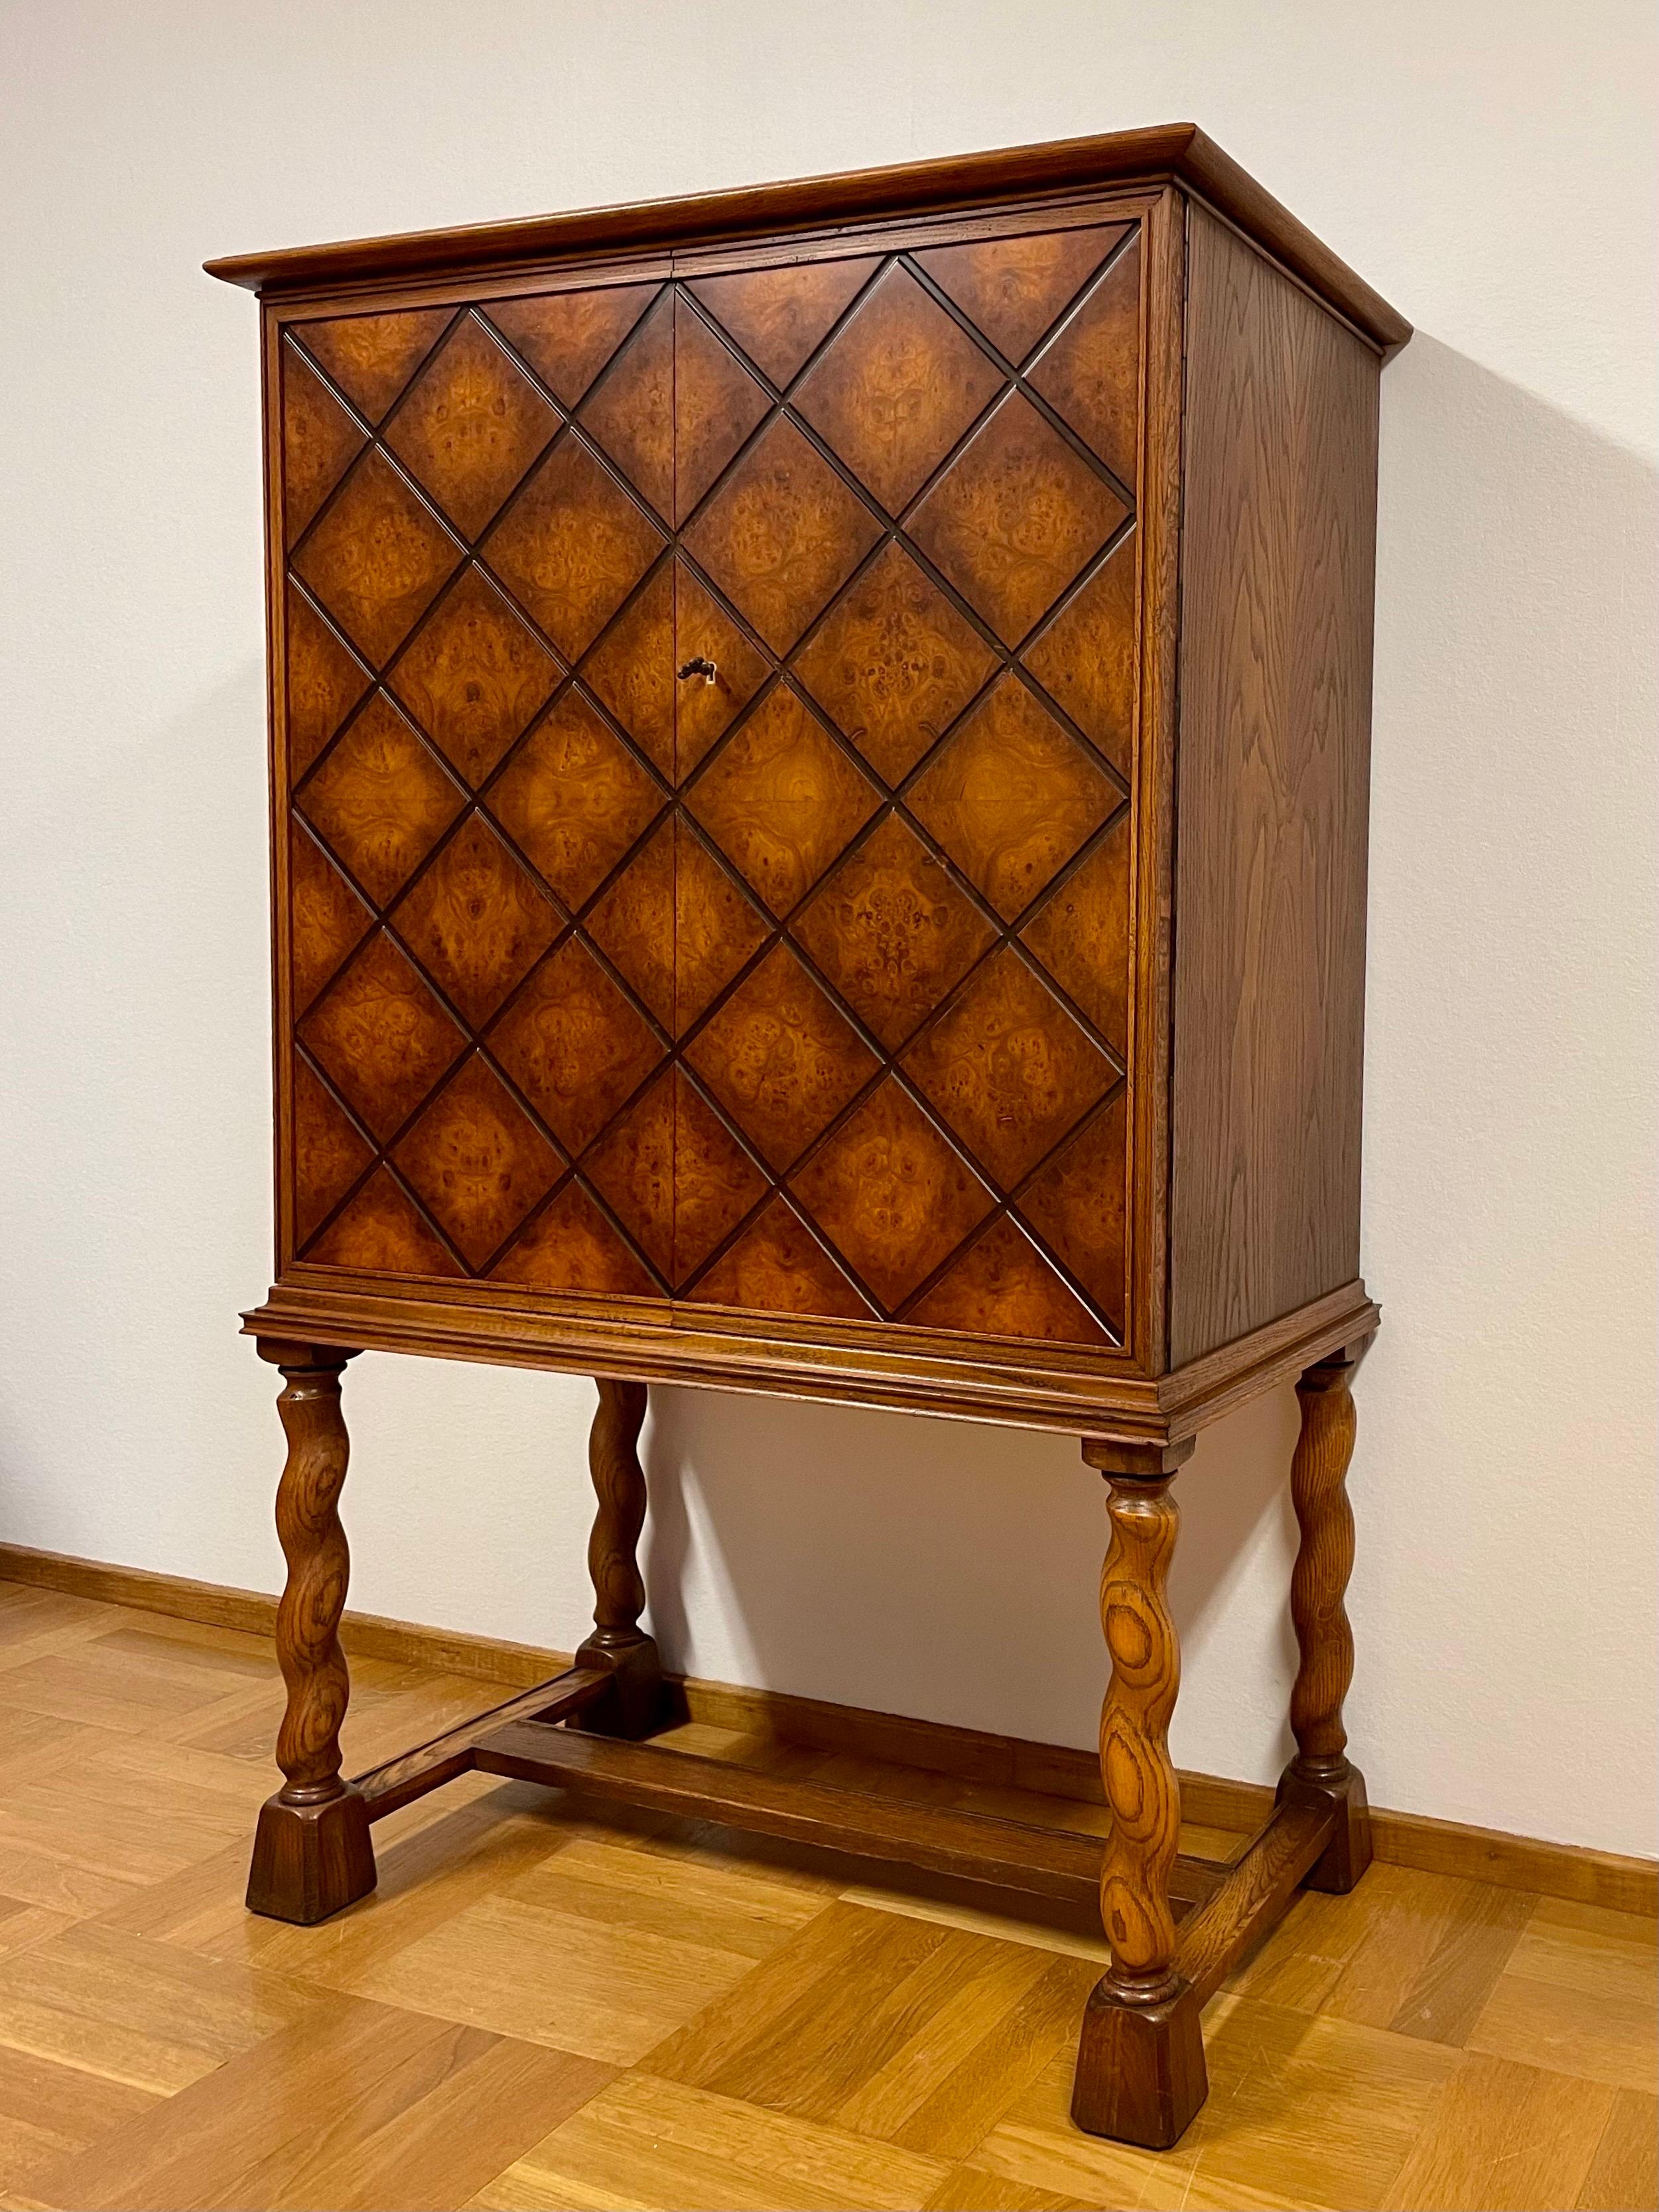 This is the Swedish Modern 1940s cabinet from the furniture factory AB Walfrid Svensson & Co in Karlstad. 

It comes with stained oak burl veneered double doors, decorated with a beautiful geometric grid pattern. The rest of the cabinet, both in-